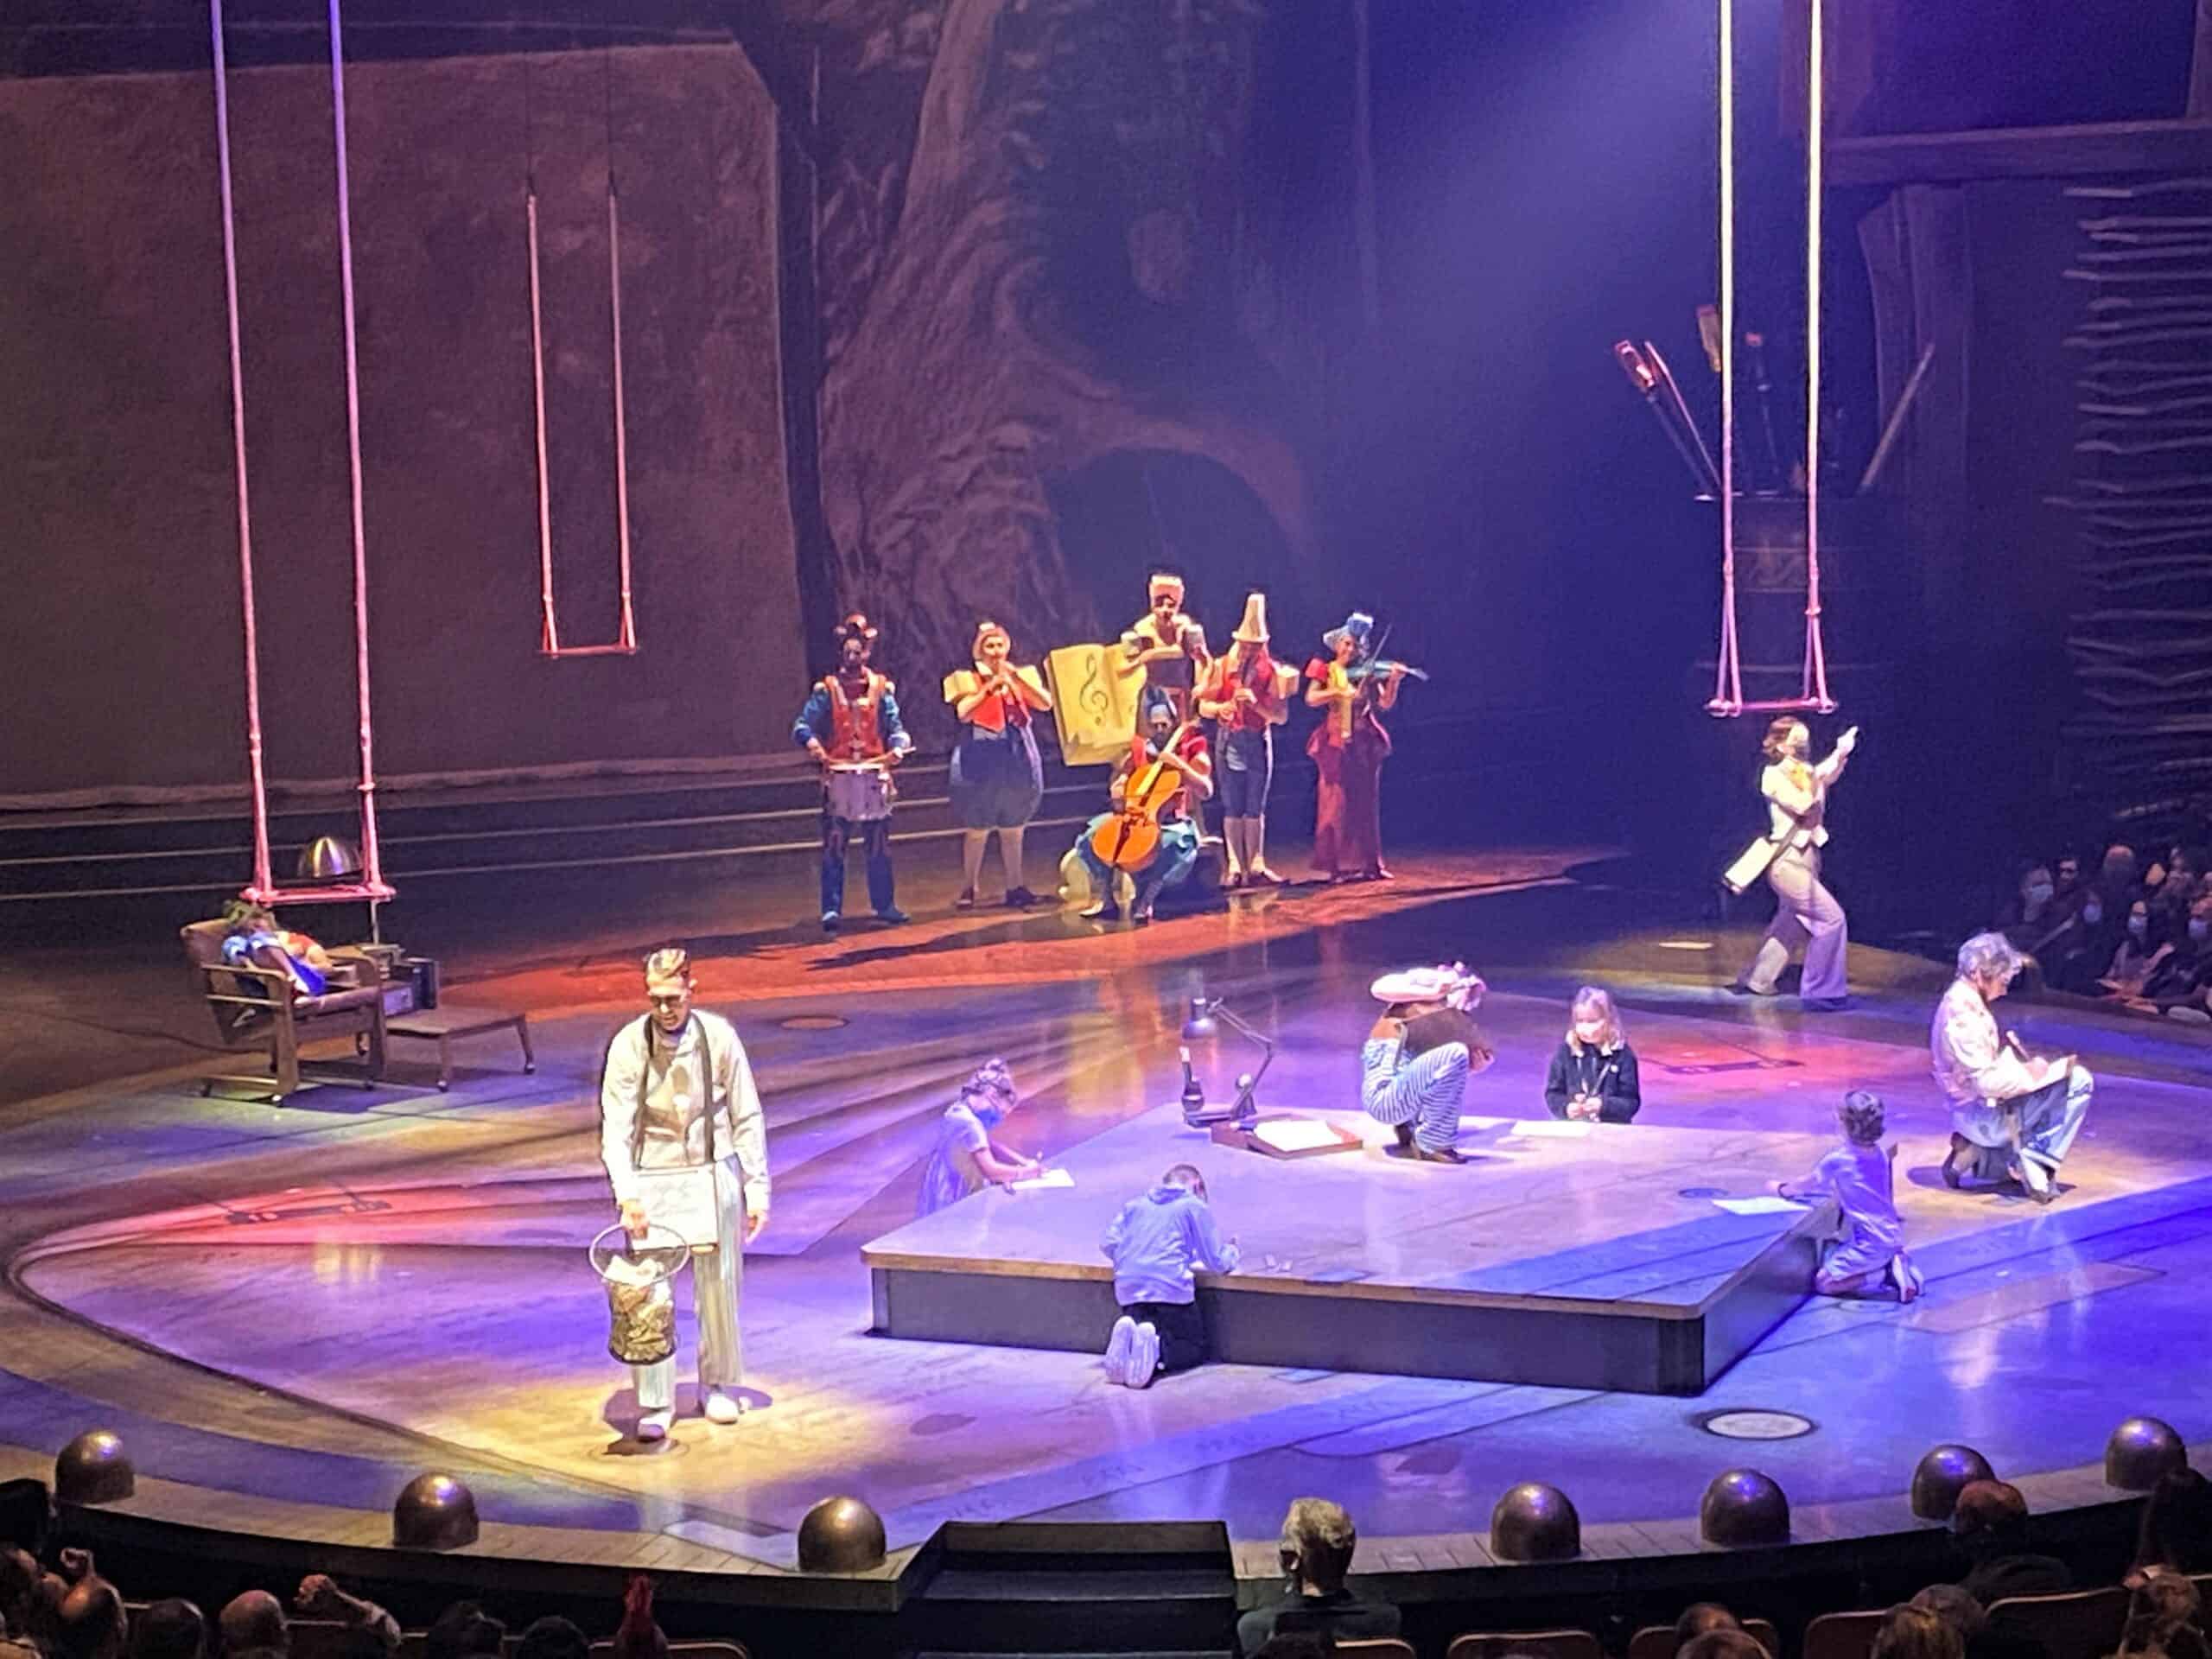 Cirque du Soleil Disney Springs - Preshow involves multiple performers on stage as well as audience participating, including from kids in the audience. The stage is illuminated in rich metallic and purple tones. Multiple performers are on stage and a small group of children are sitting around a square on the stage, drawing pictures. 